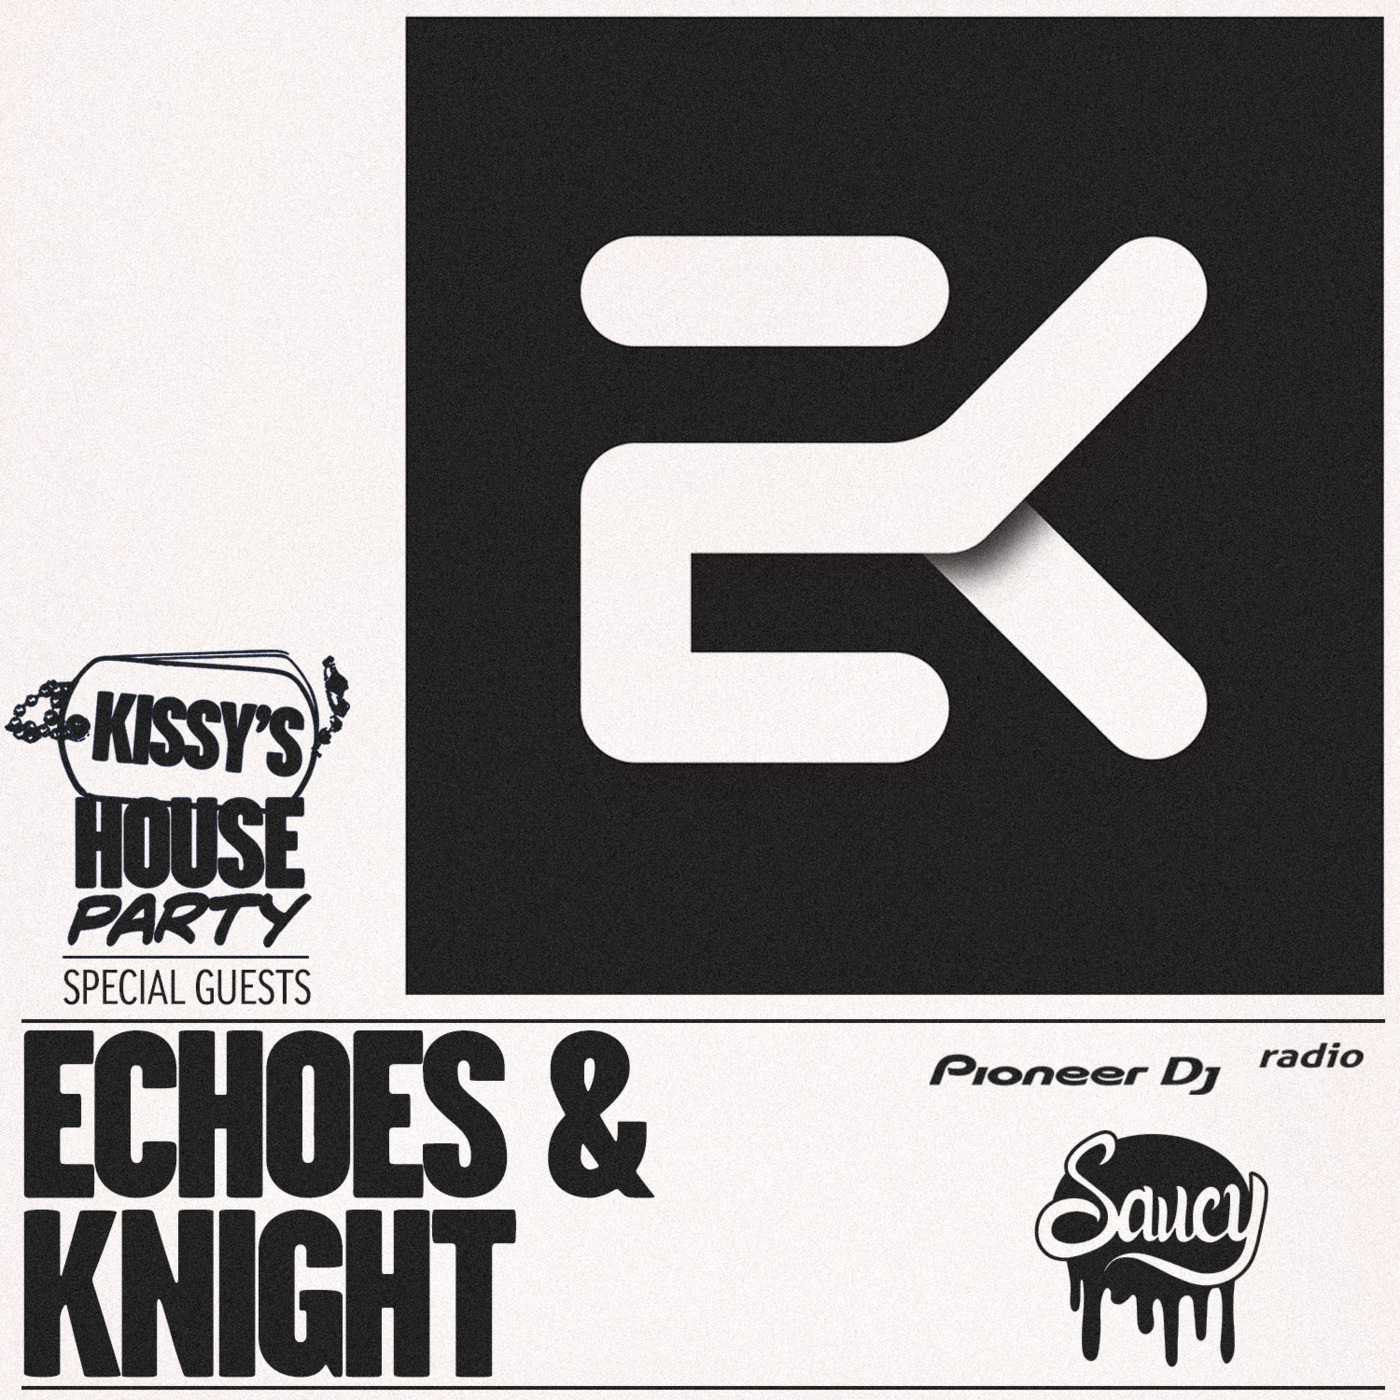 Kissy's House Party [56] w/ ECHOES & KNIGHT (Saucy Records) @ Pioneer DJ Radio